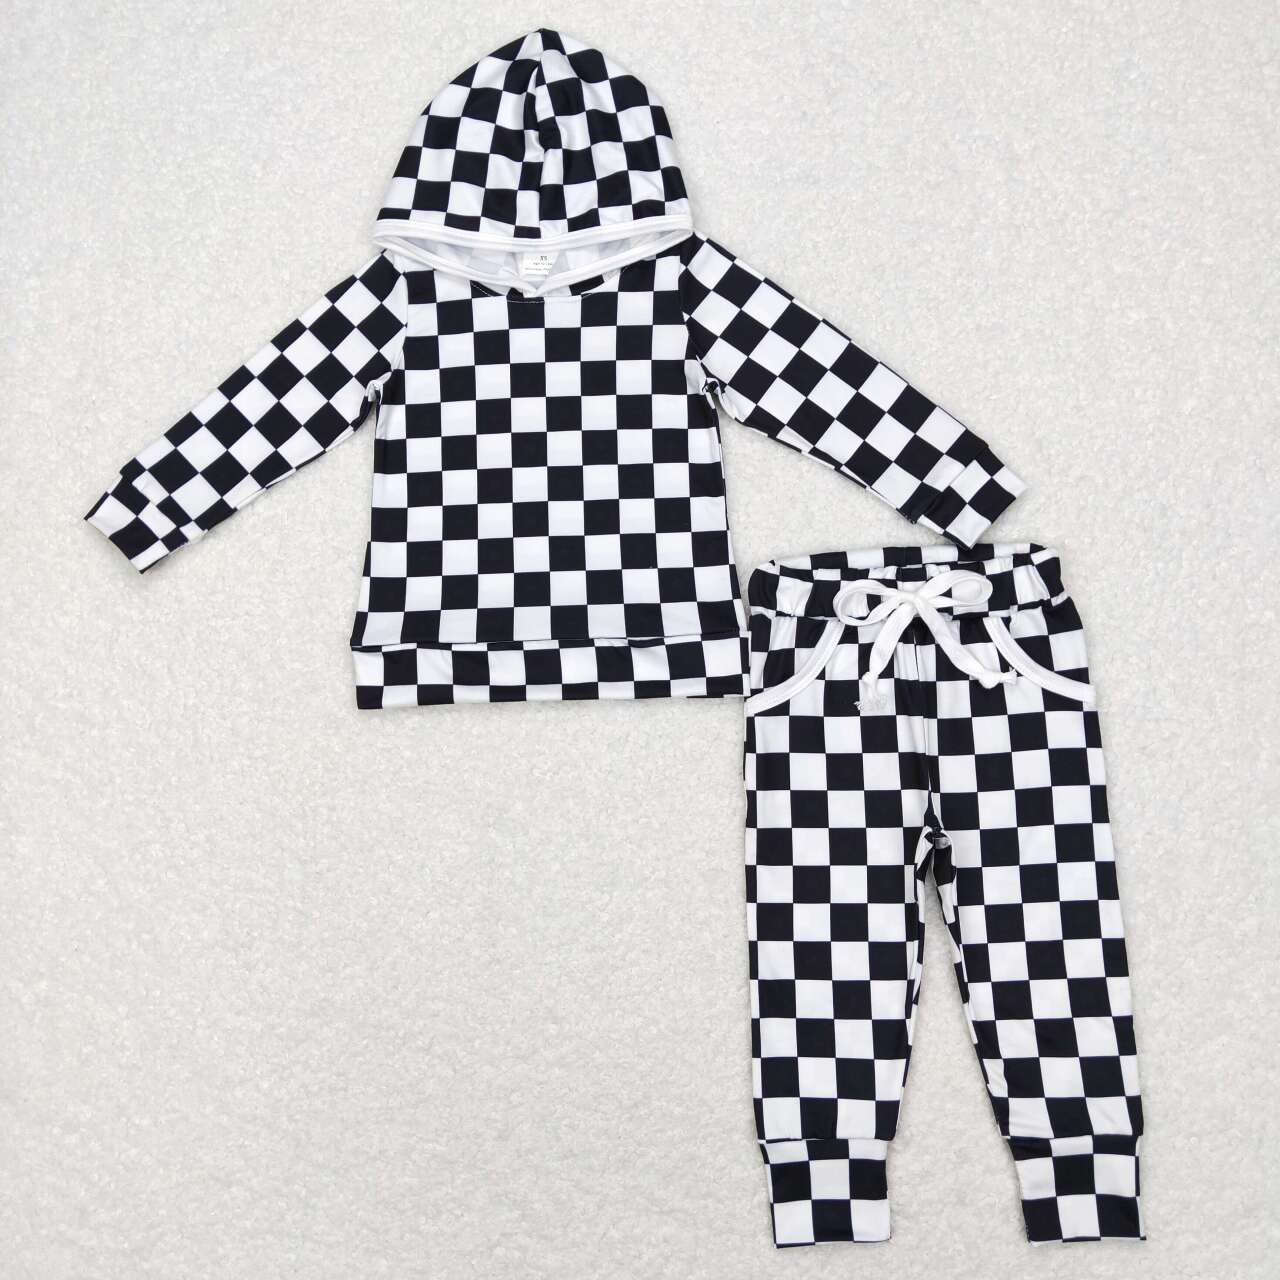 BLP0434 Black and white plaid hooded long-sleeved trousers suit